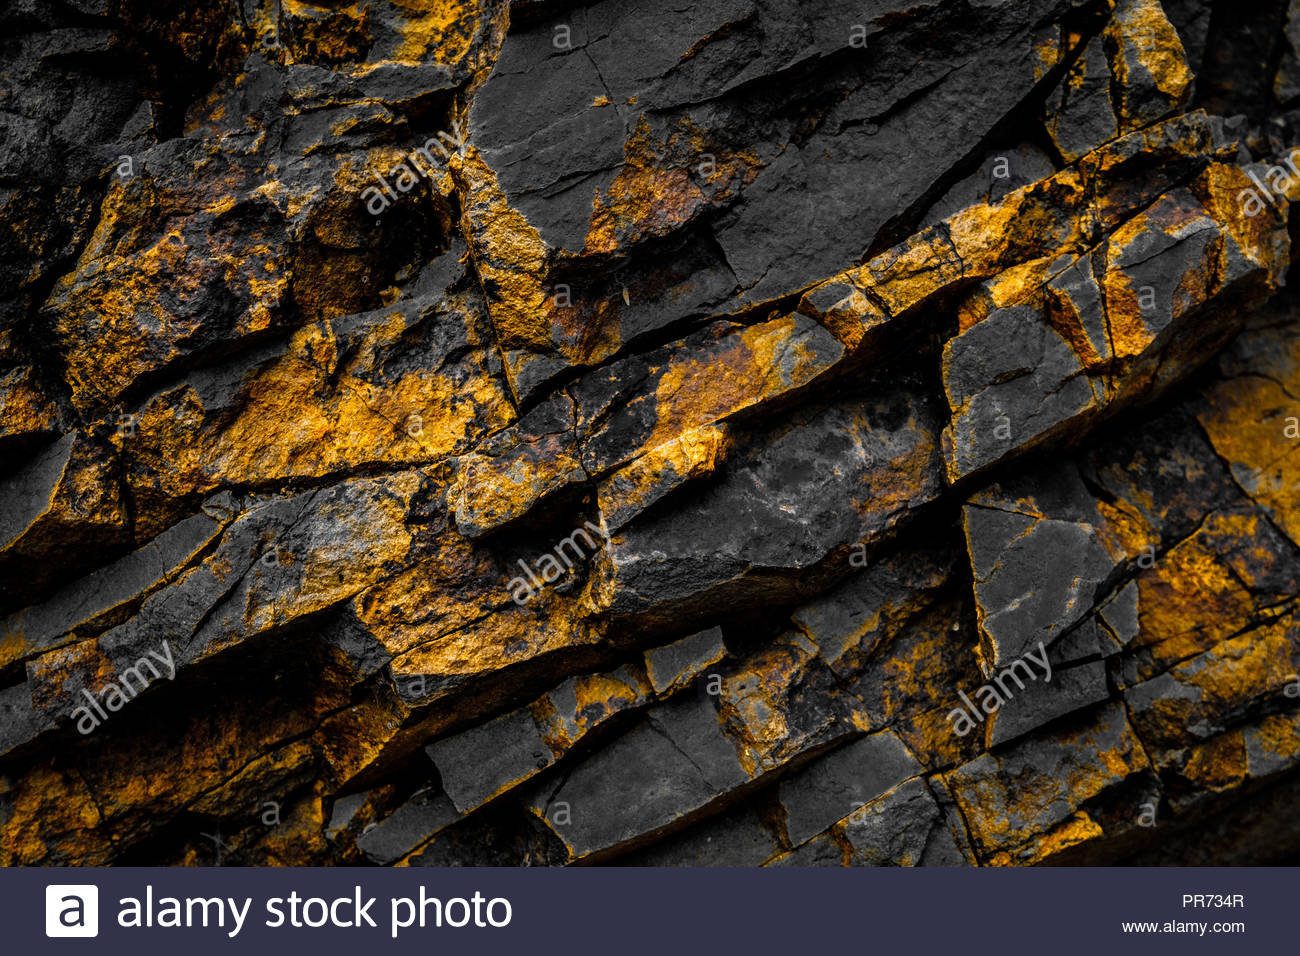 Black Rock Background With Gold Yellow Colored Rocks Stock Photo